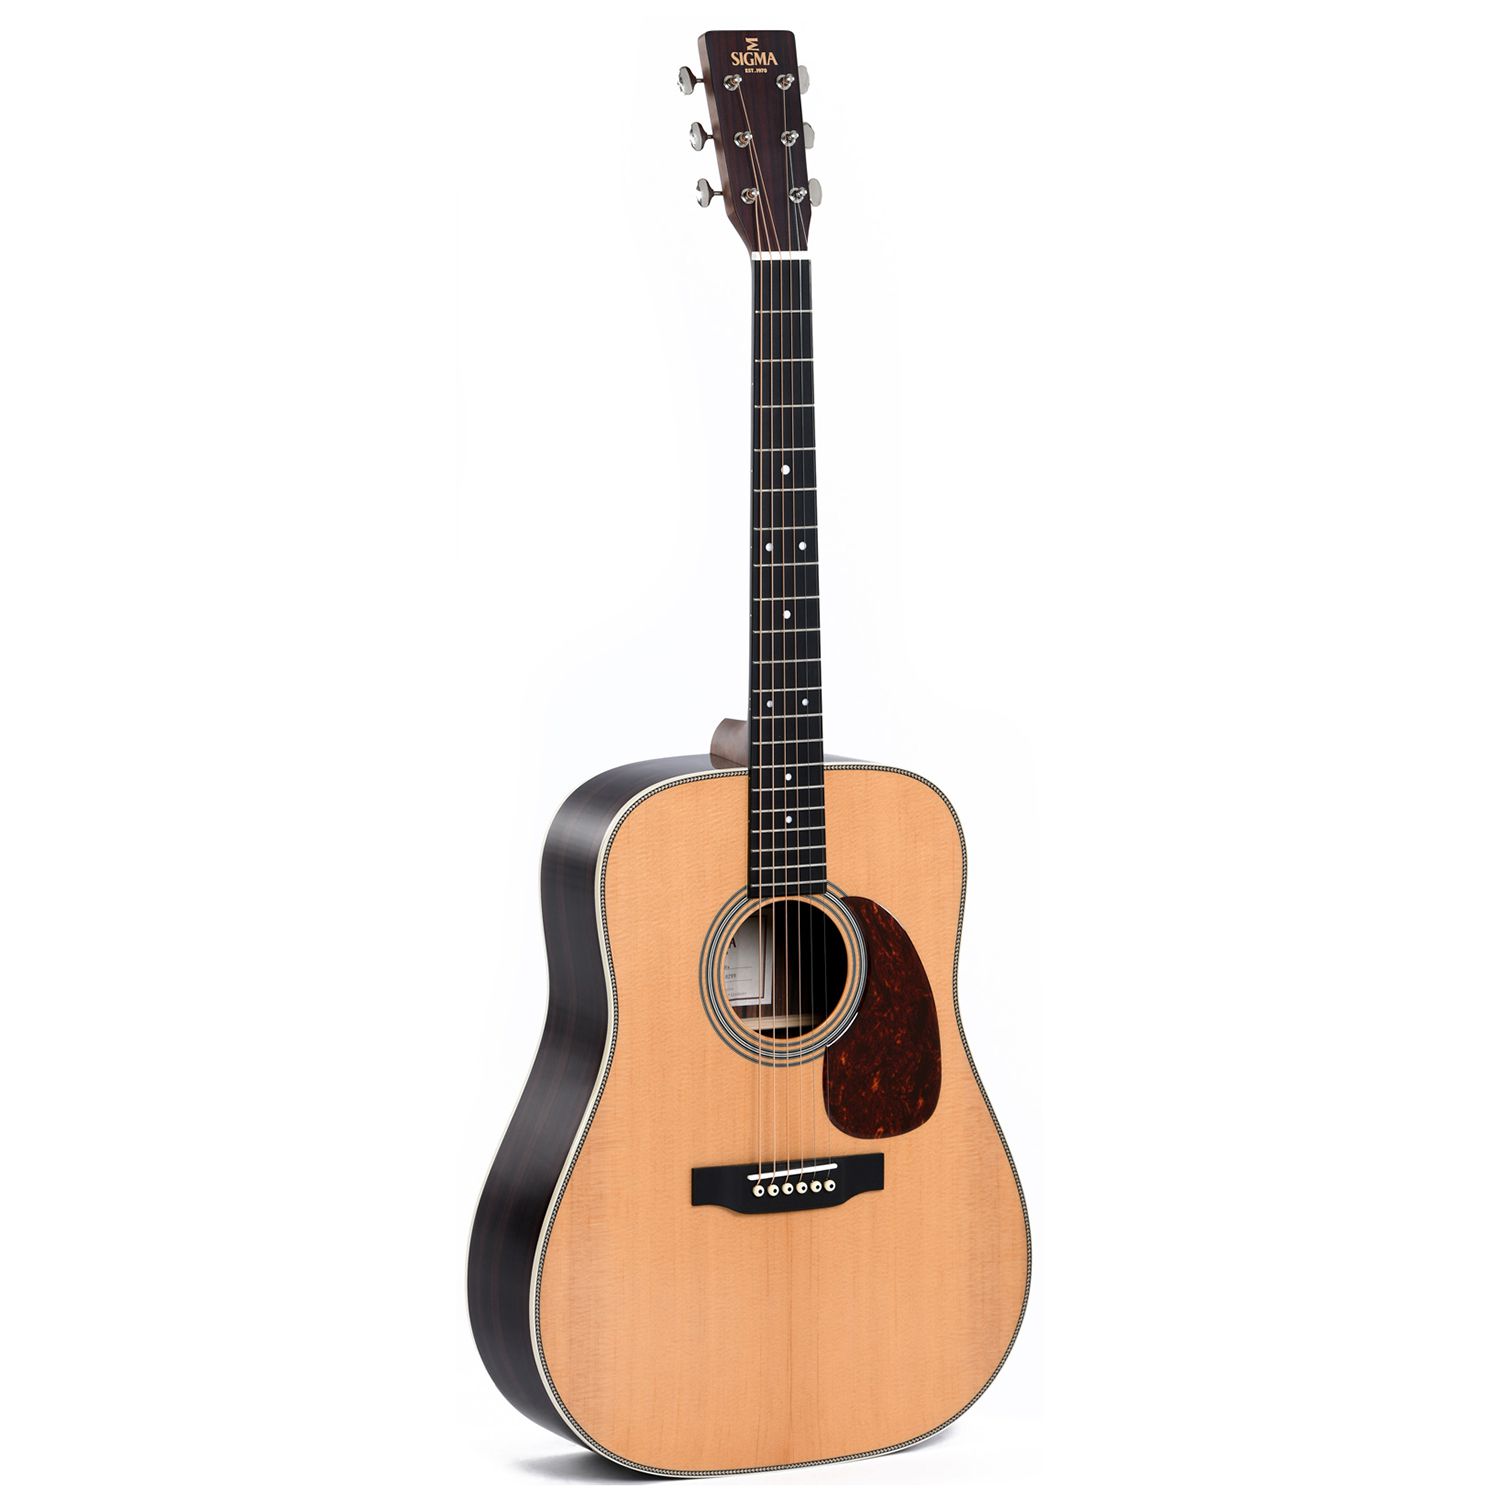 An image of Sigma Standard Series DT-28H Acoustic